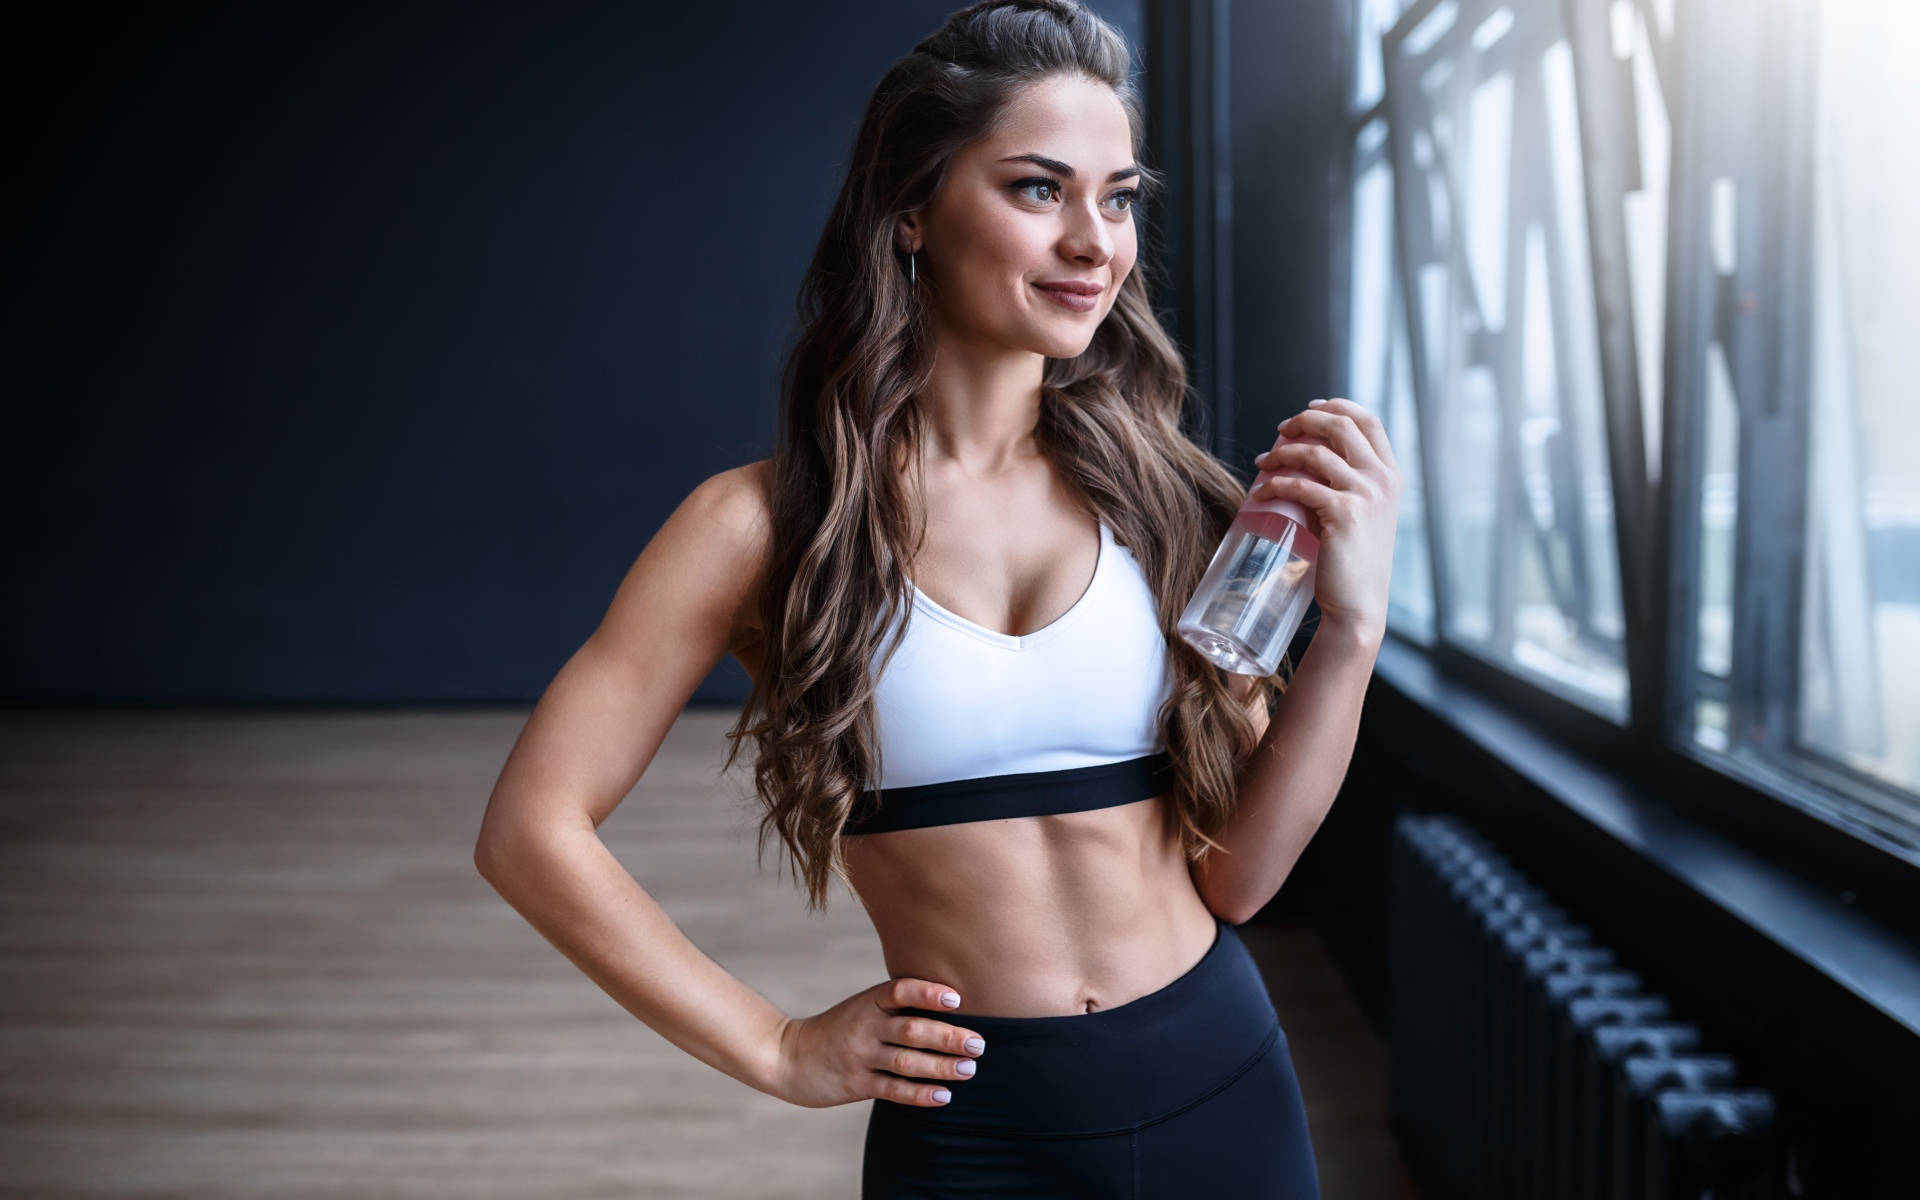 Beautiful athletic girl with a bottle of water in hand